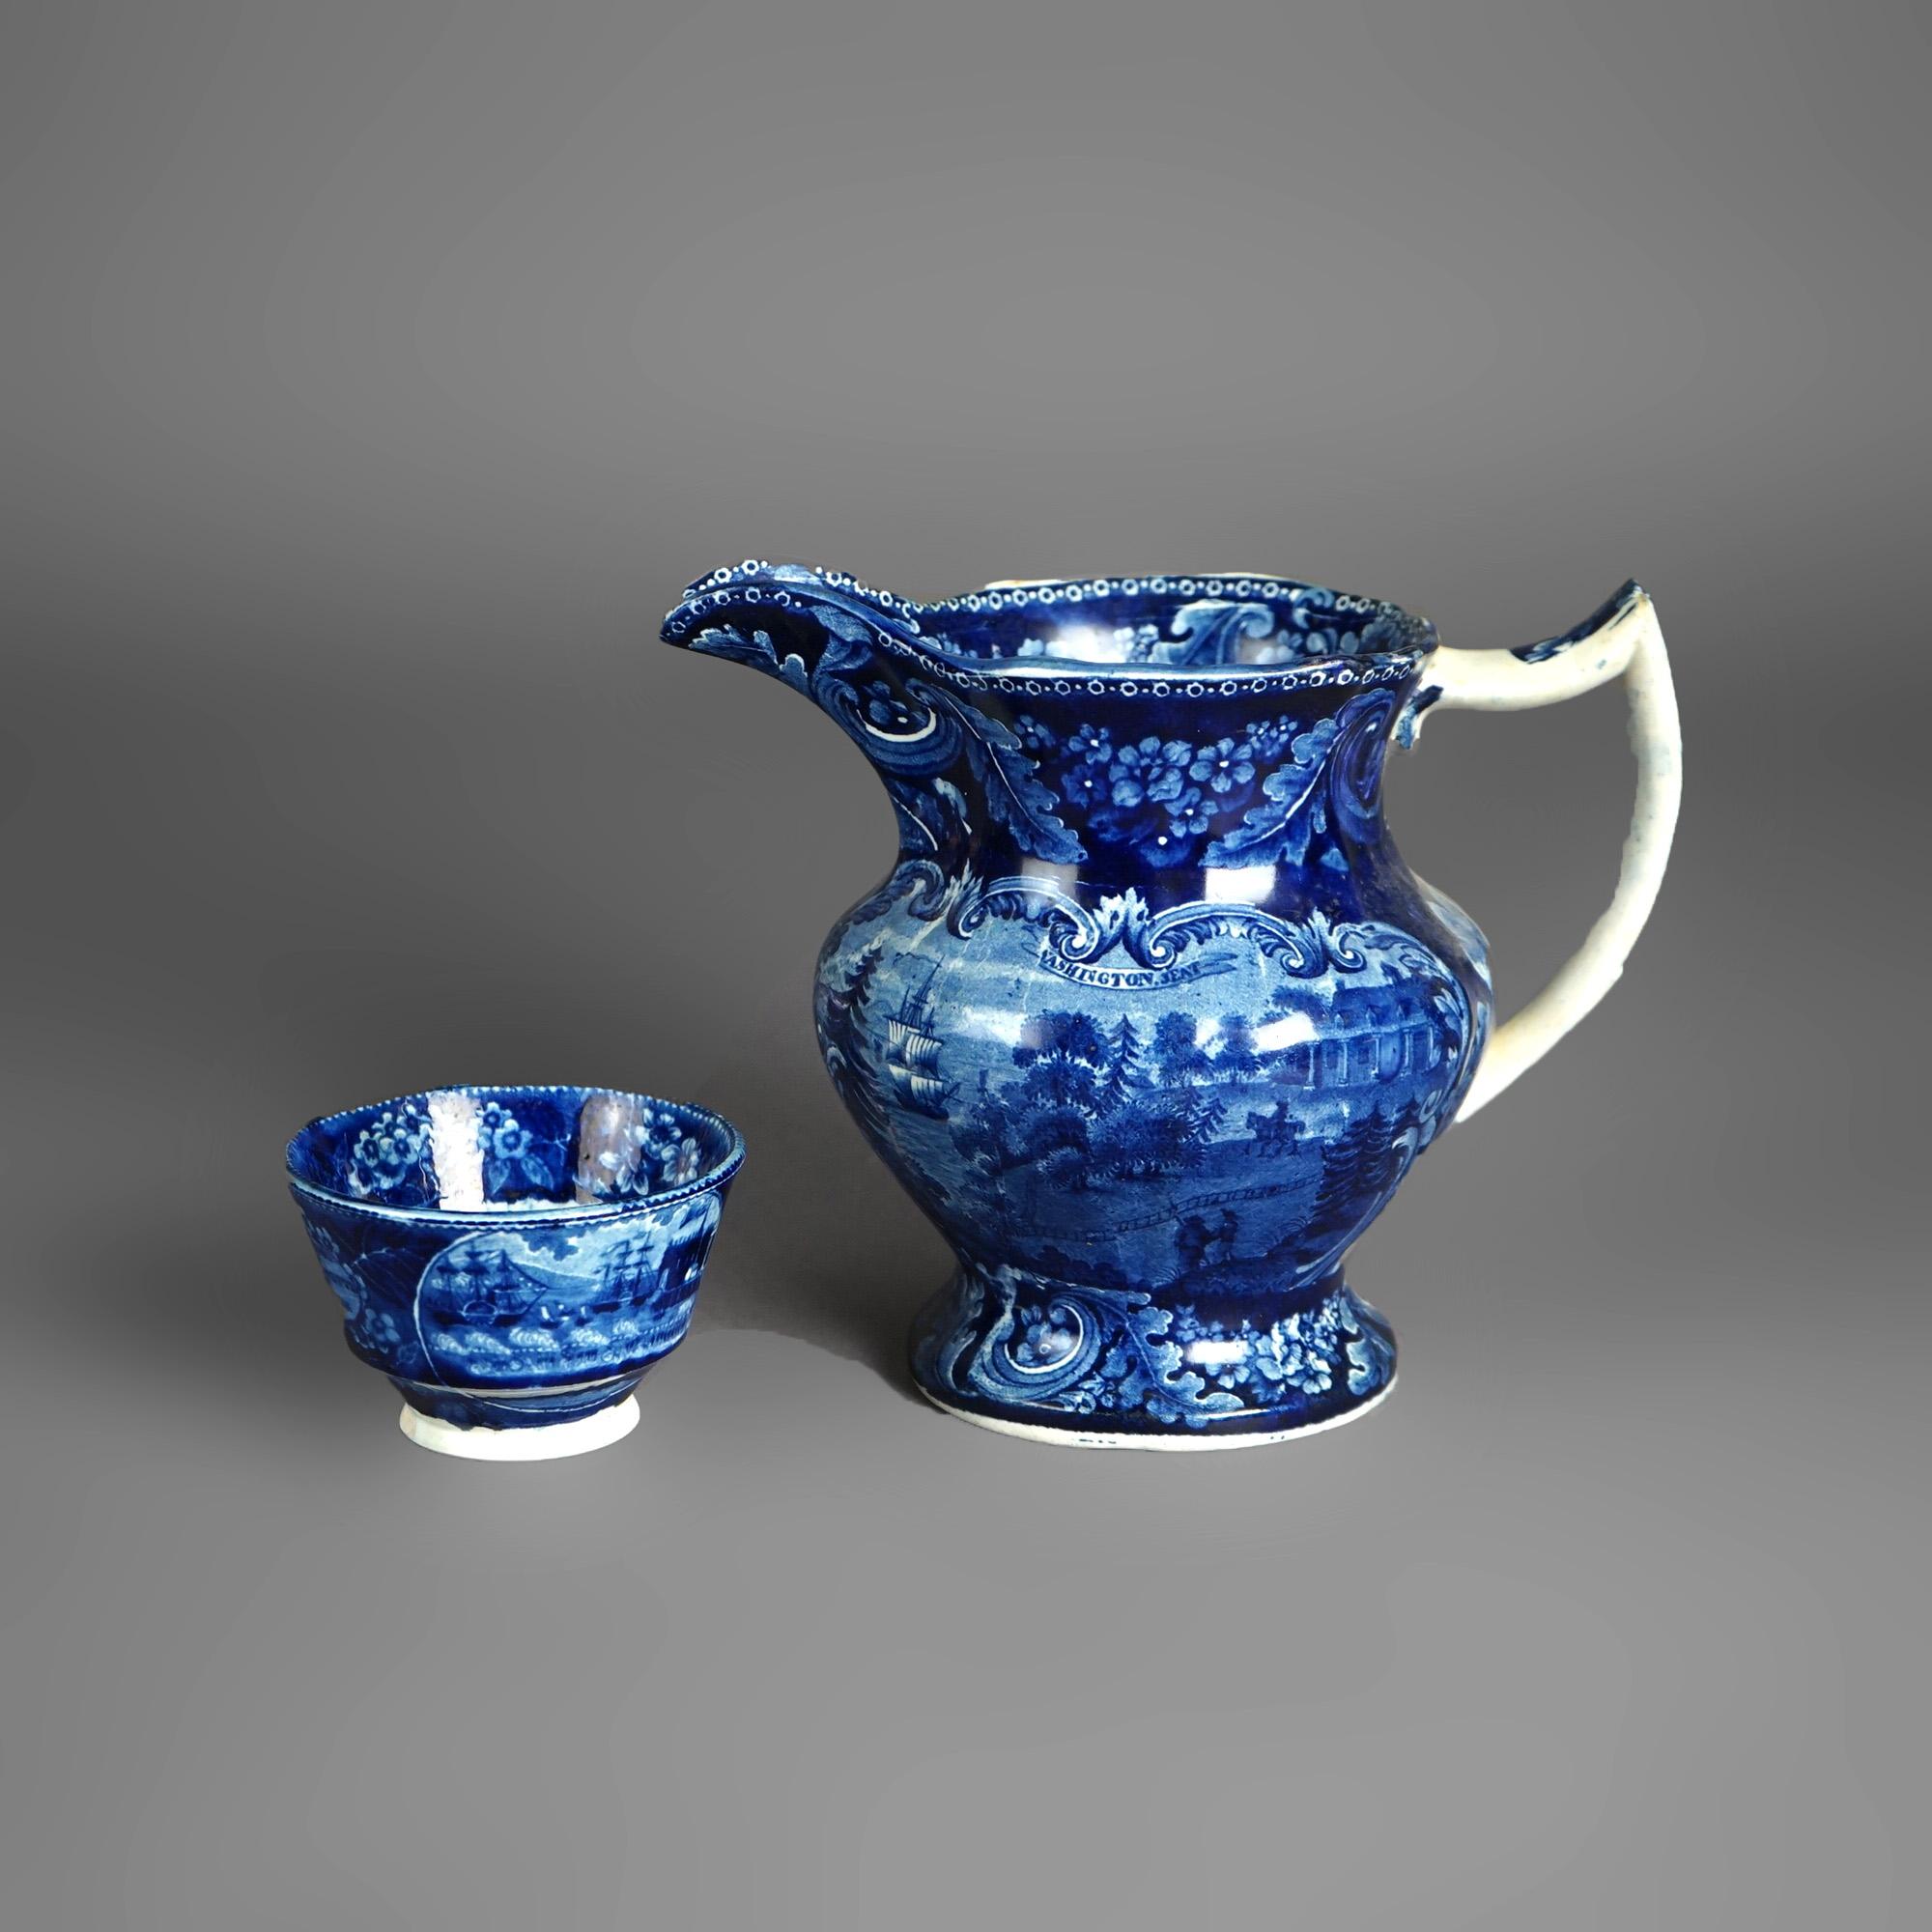 19th Century Antique Staffordshire Pottery Flow Blue Historical Pitcher & Cup with Ship 19thC